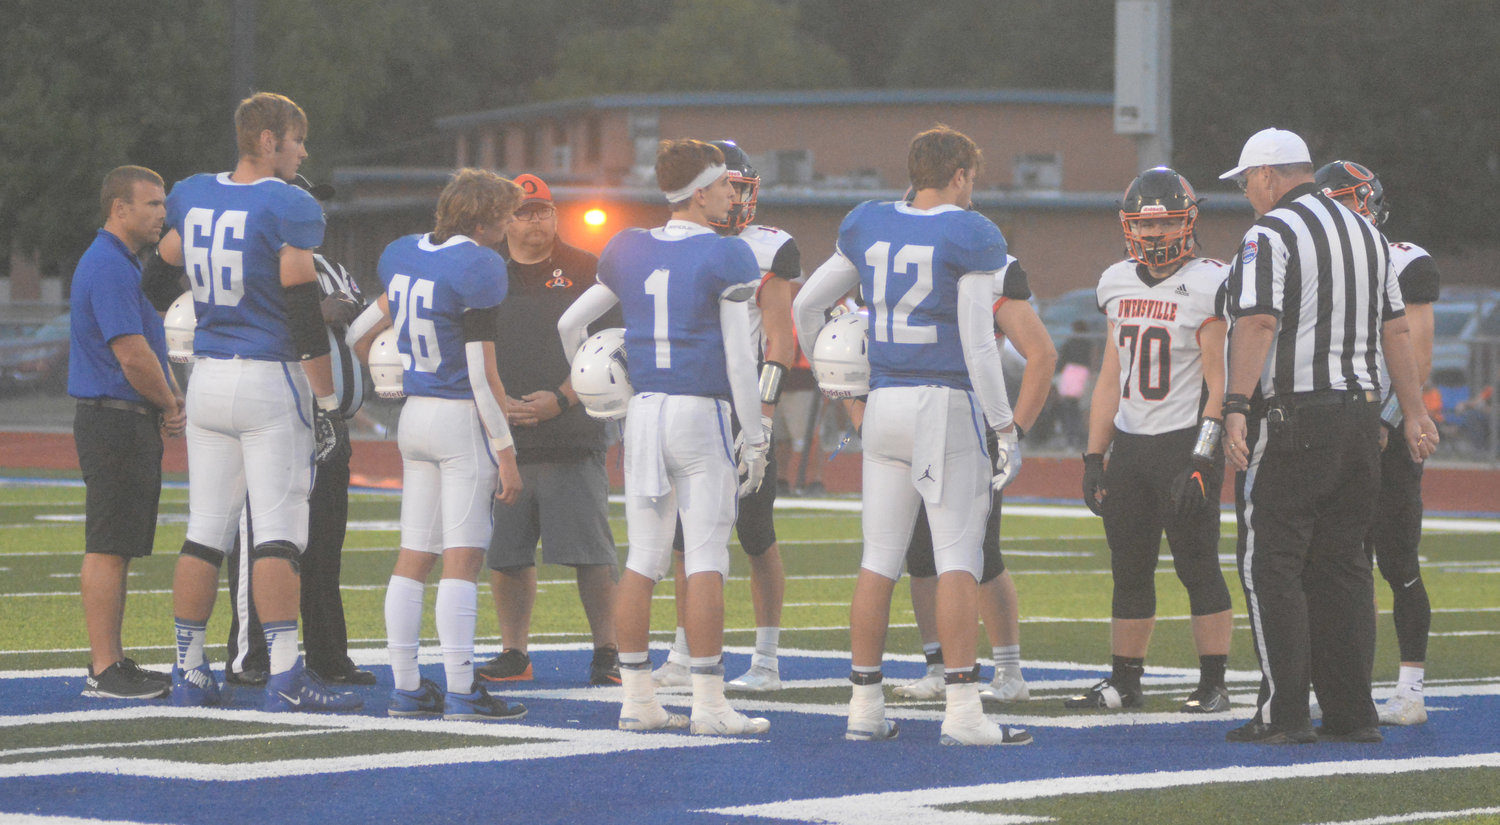 Captains (above) met for the pregame coin toss at Bearcat Memorial Stadium before kickoff of the annual Gasconade County Bowl between the host Hermann Bearcats and visiting Owensville Dutchmen. Hermann captains coached by Andy Emmons (above, from left) include Schuler Erickson (66), Kole Eldringhoff (26), Conner Coffey (1) and Parker Anderson (12). Owensville captains coached by Nathan Cabot (above, from left) were Derek Brandt, Logan Evans, Brent Helmig and Brendan Decker.